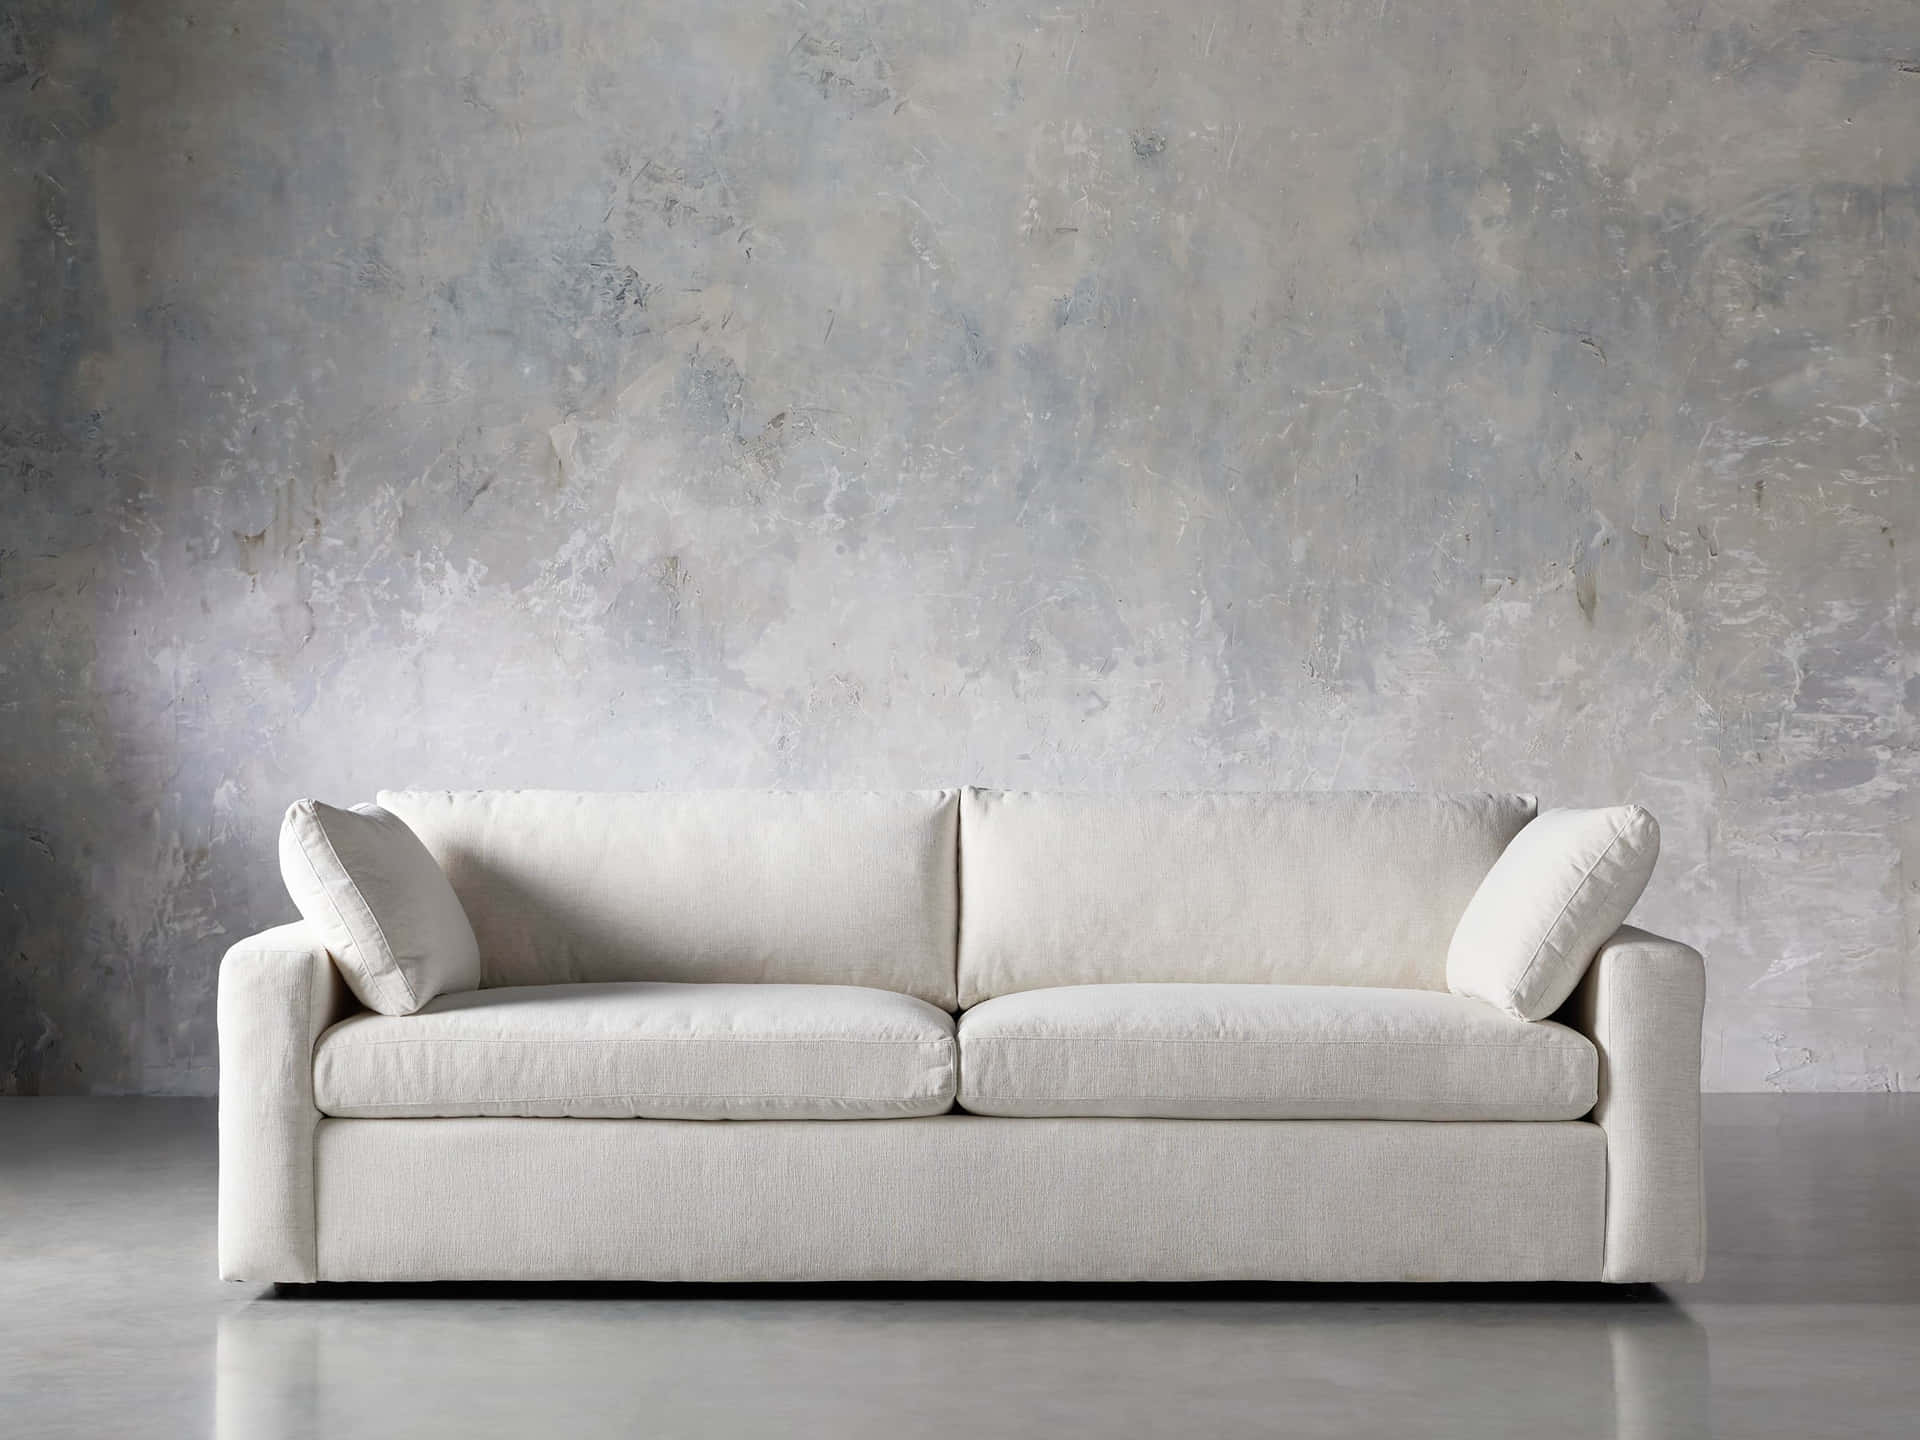 Living Room Off White Couch Concrete Wall Background